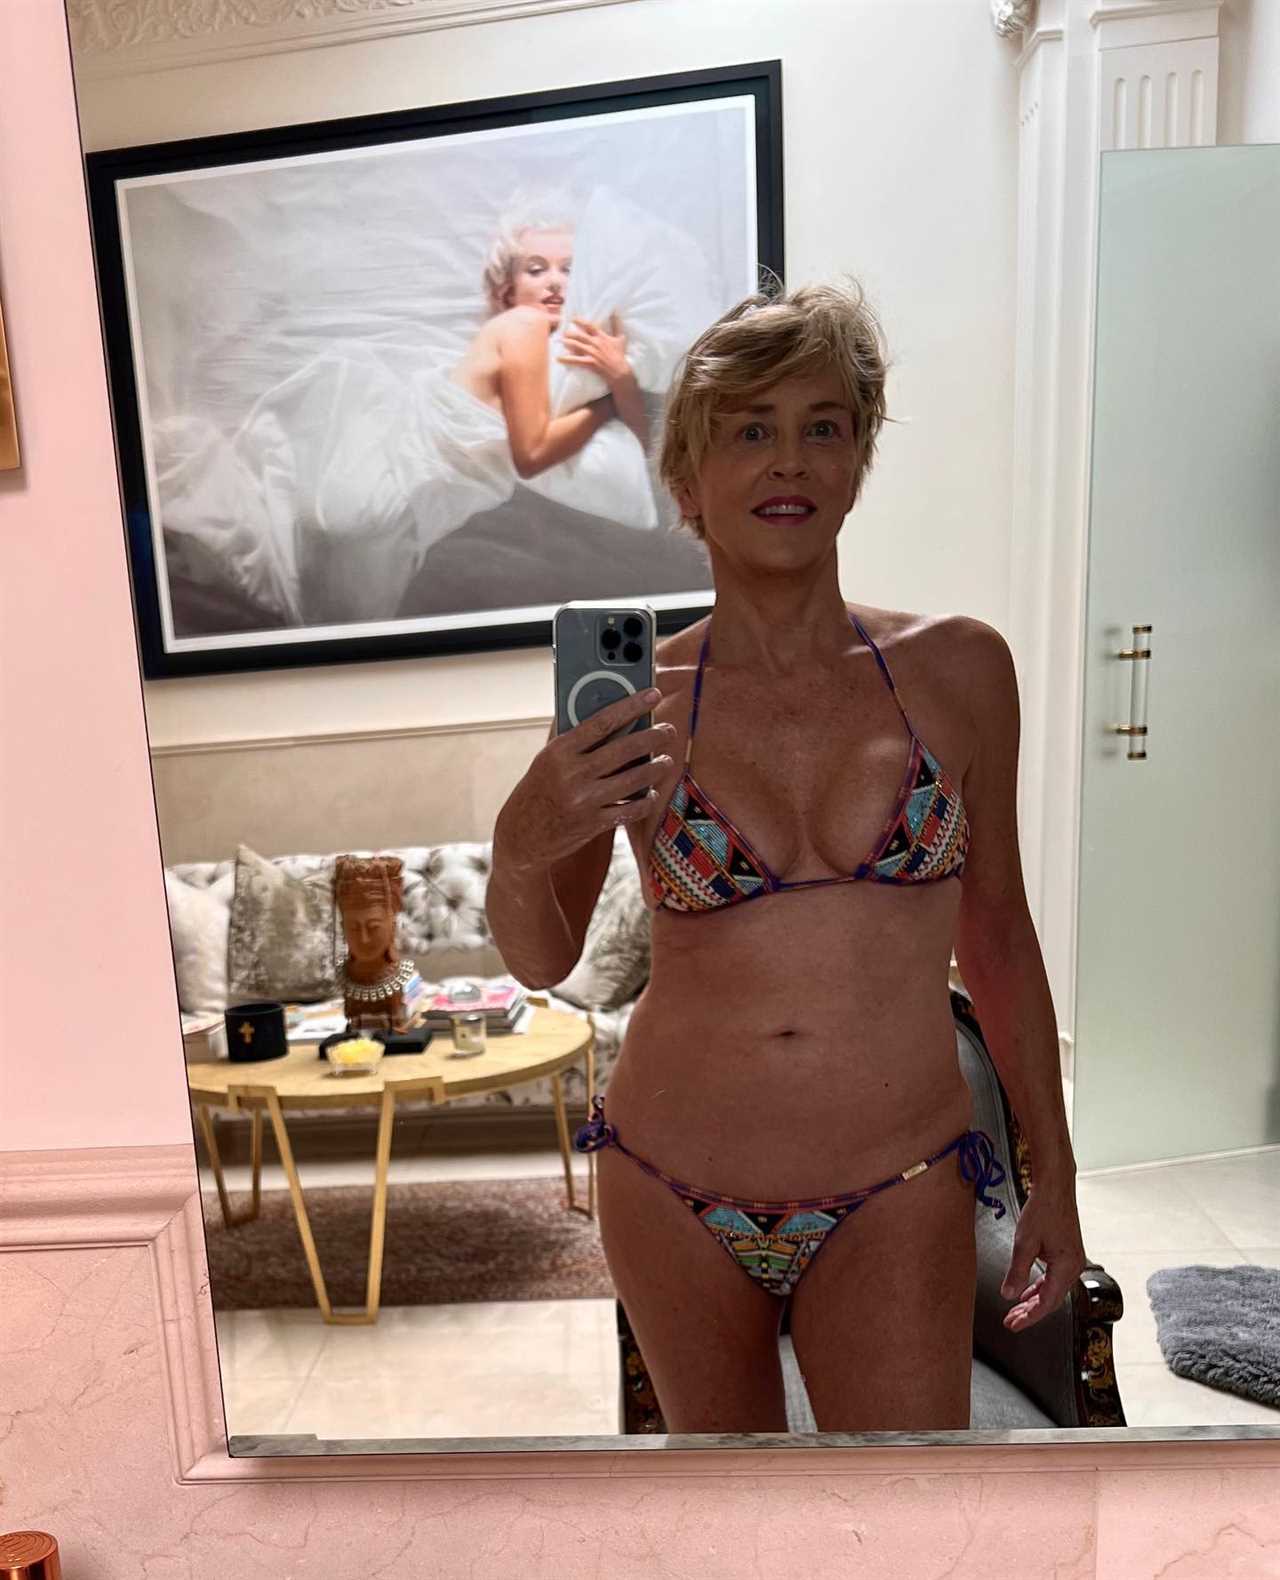 Sharon Stone, 65, shows off bare butt in very tiny Dolce & Gabbana thong bikini for jaw-dropping new selfie